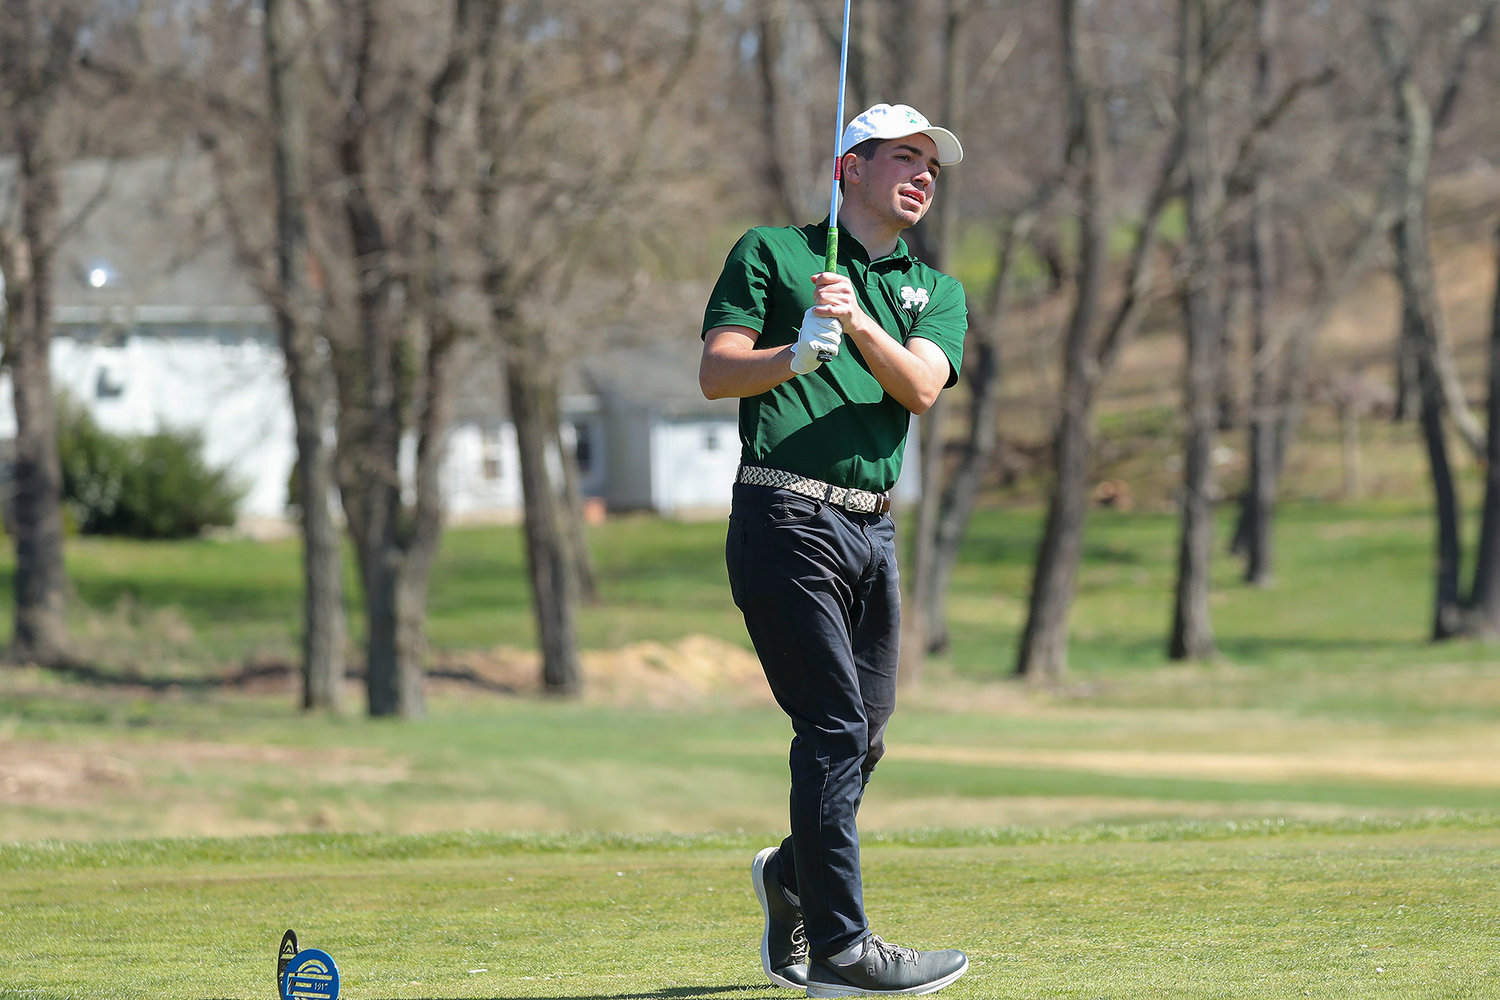 Manhattan College golf's team finished 15th in the Hartford Haeck Invitational last week. This week end they will compete at the Autumn Invitational in Lake Placid.